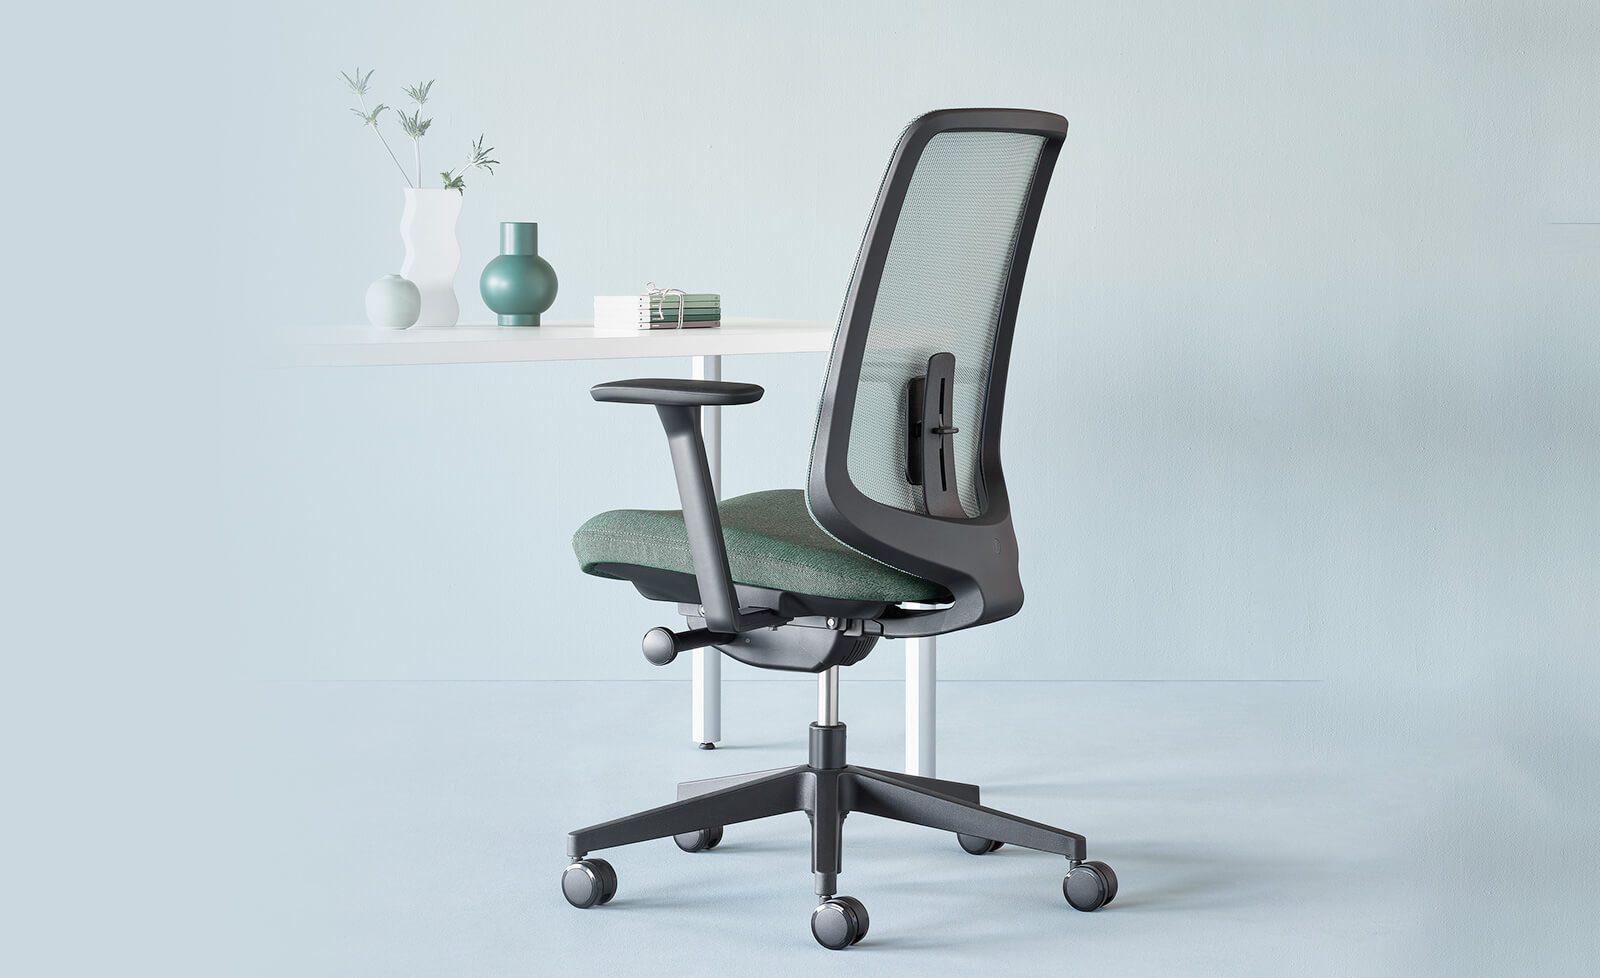 Verus chair on a white office desk setting